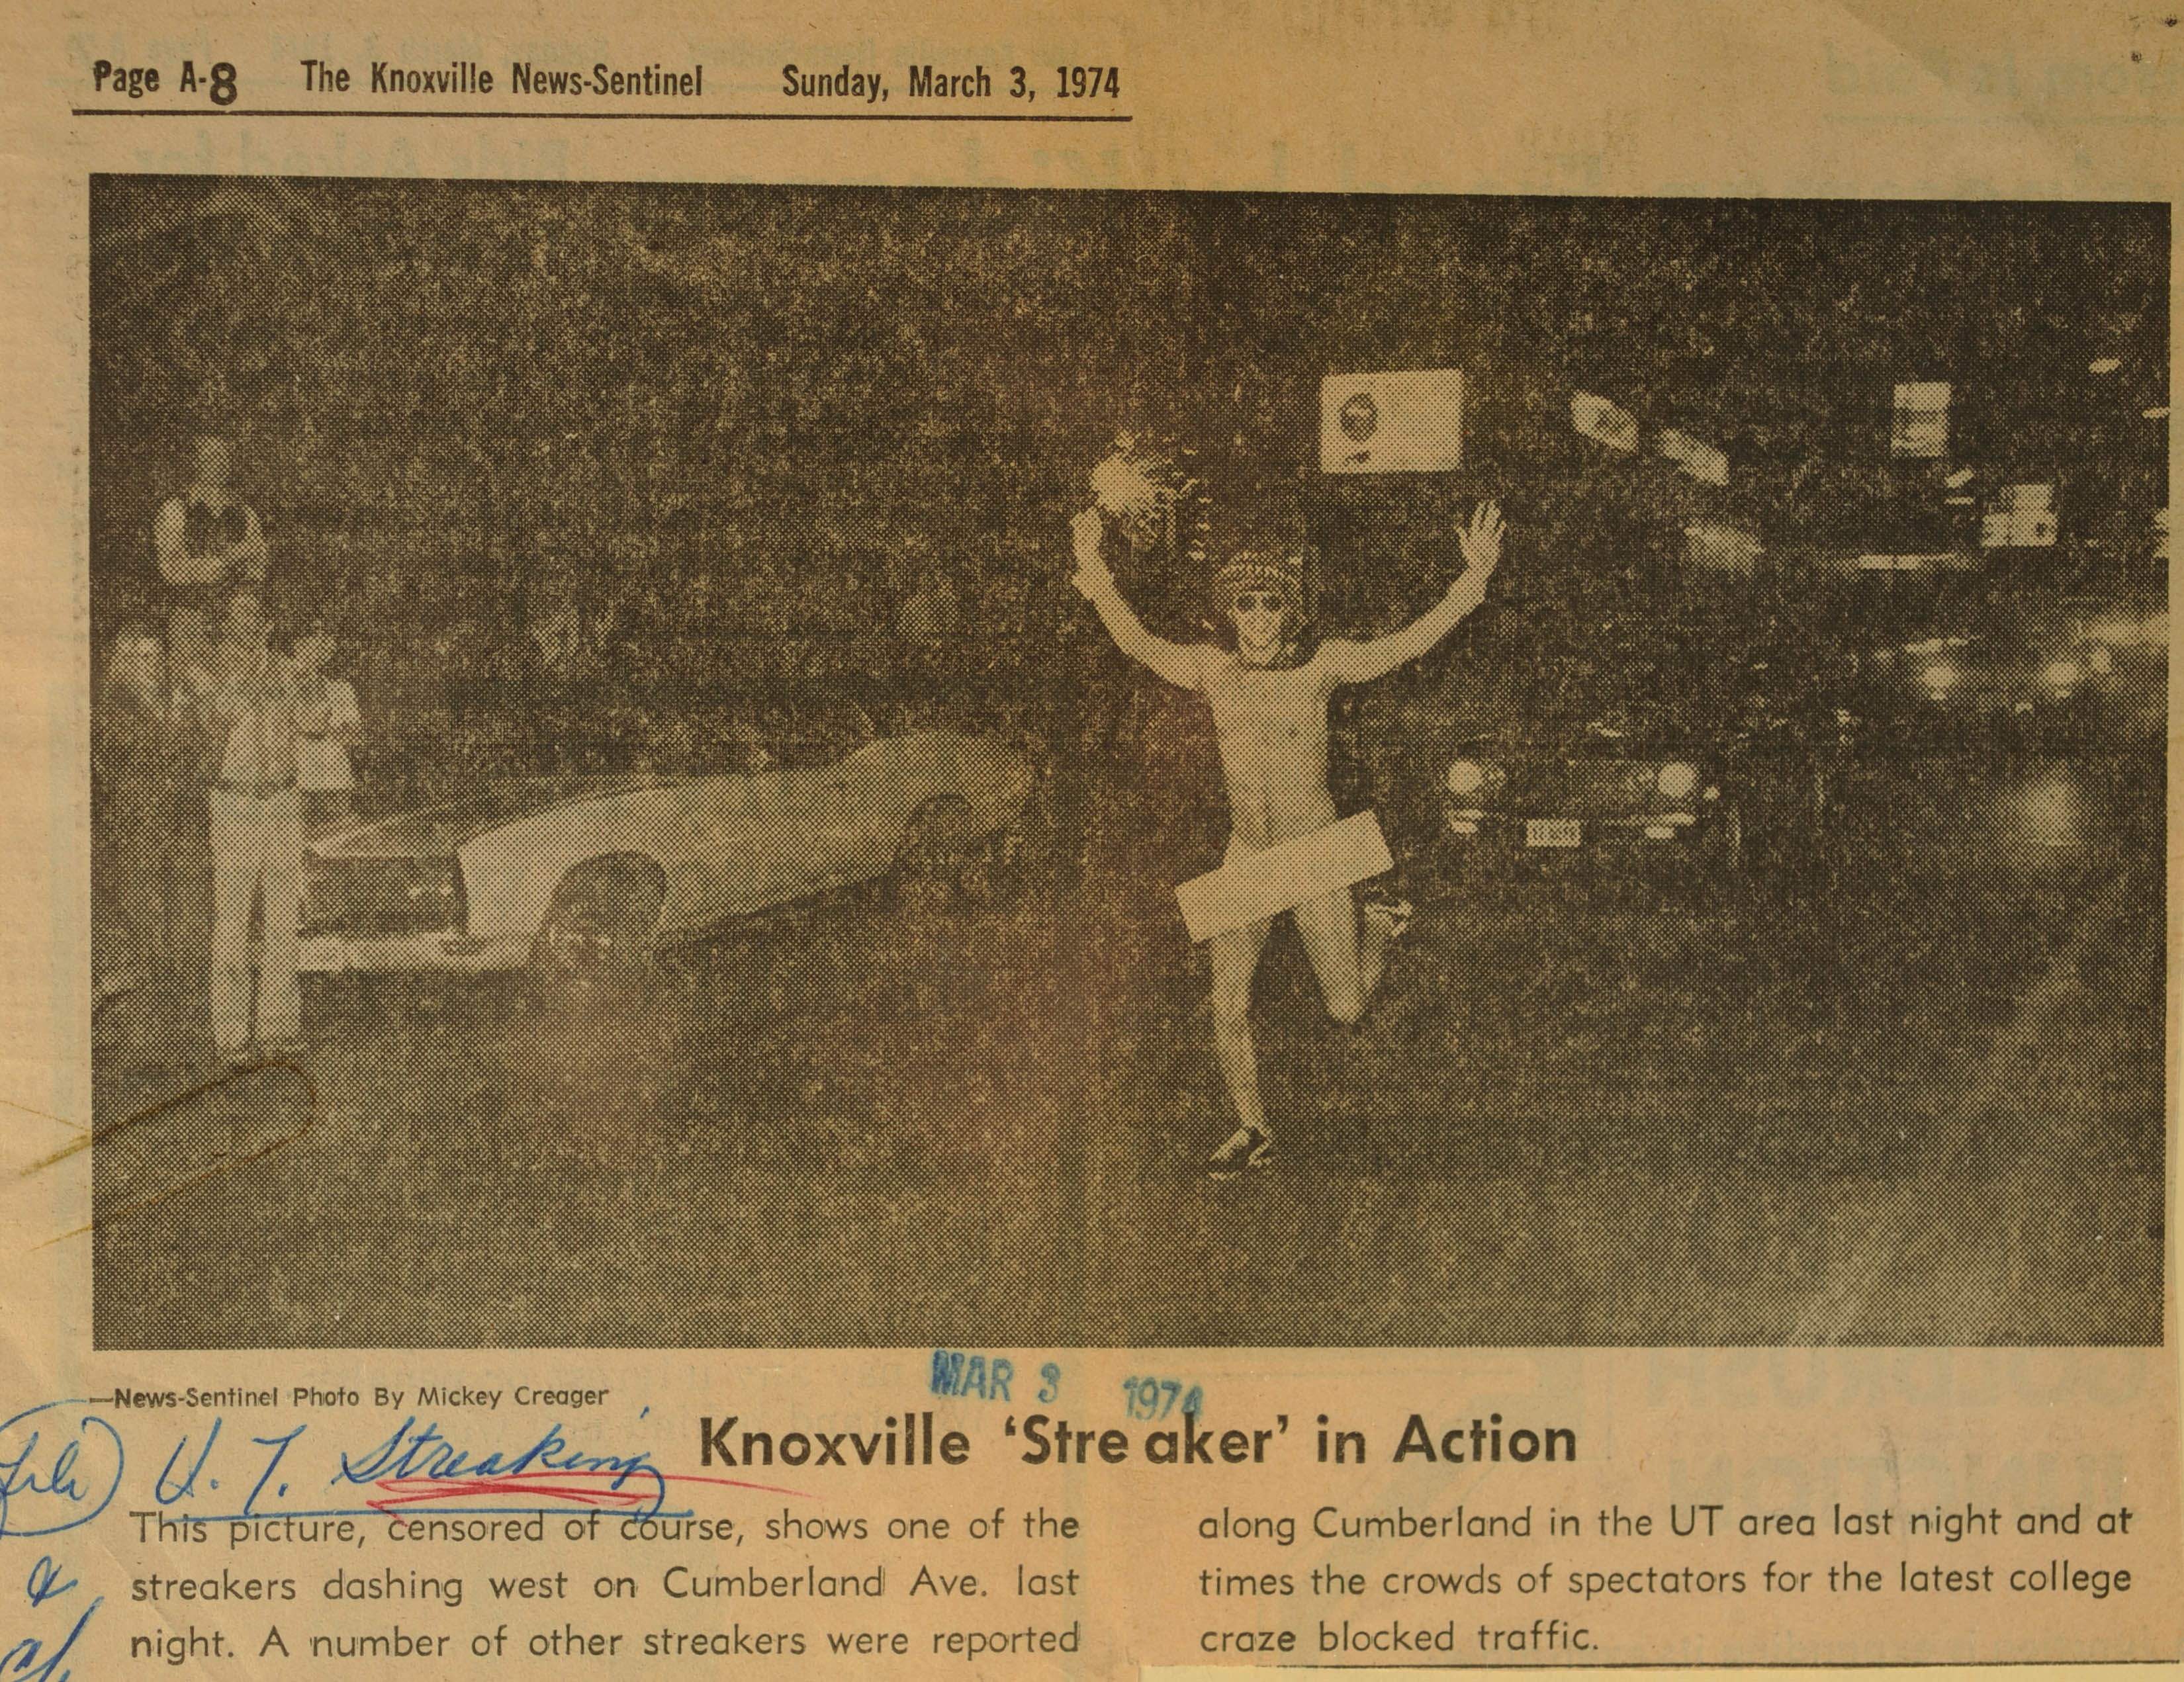 A clipping from the paper's March 3, 1974, edition shows photographer Mickey Creager's image of a streaker engaging in the latest college craze. The paper reported the young man - carrying a Fourth of July type sparkler and wearing only a hat, tie, sunglasses and shoes - jogged down Cumberland Avenue to the delight of some 350 spectators.